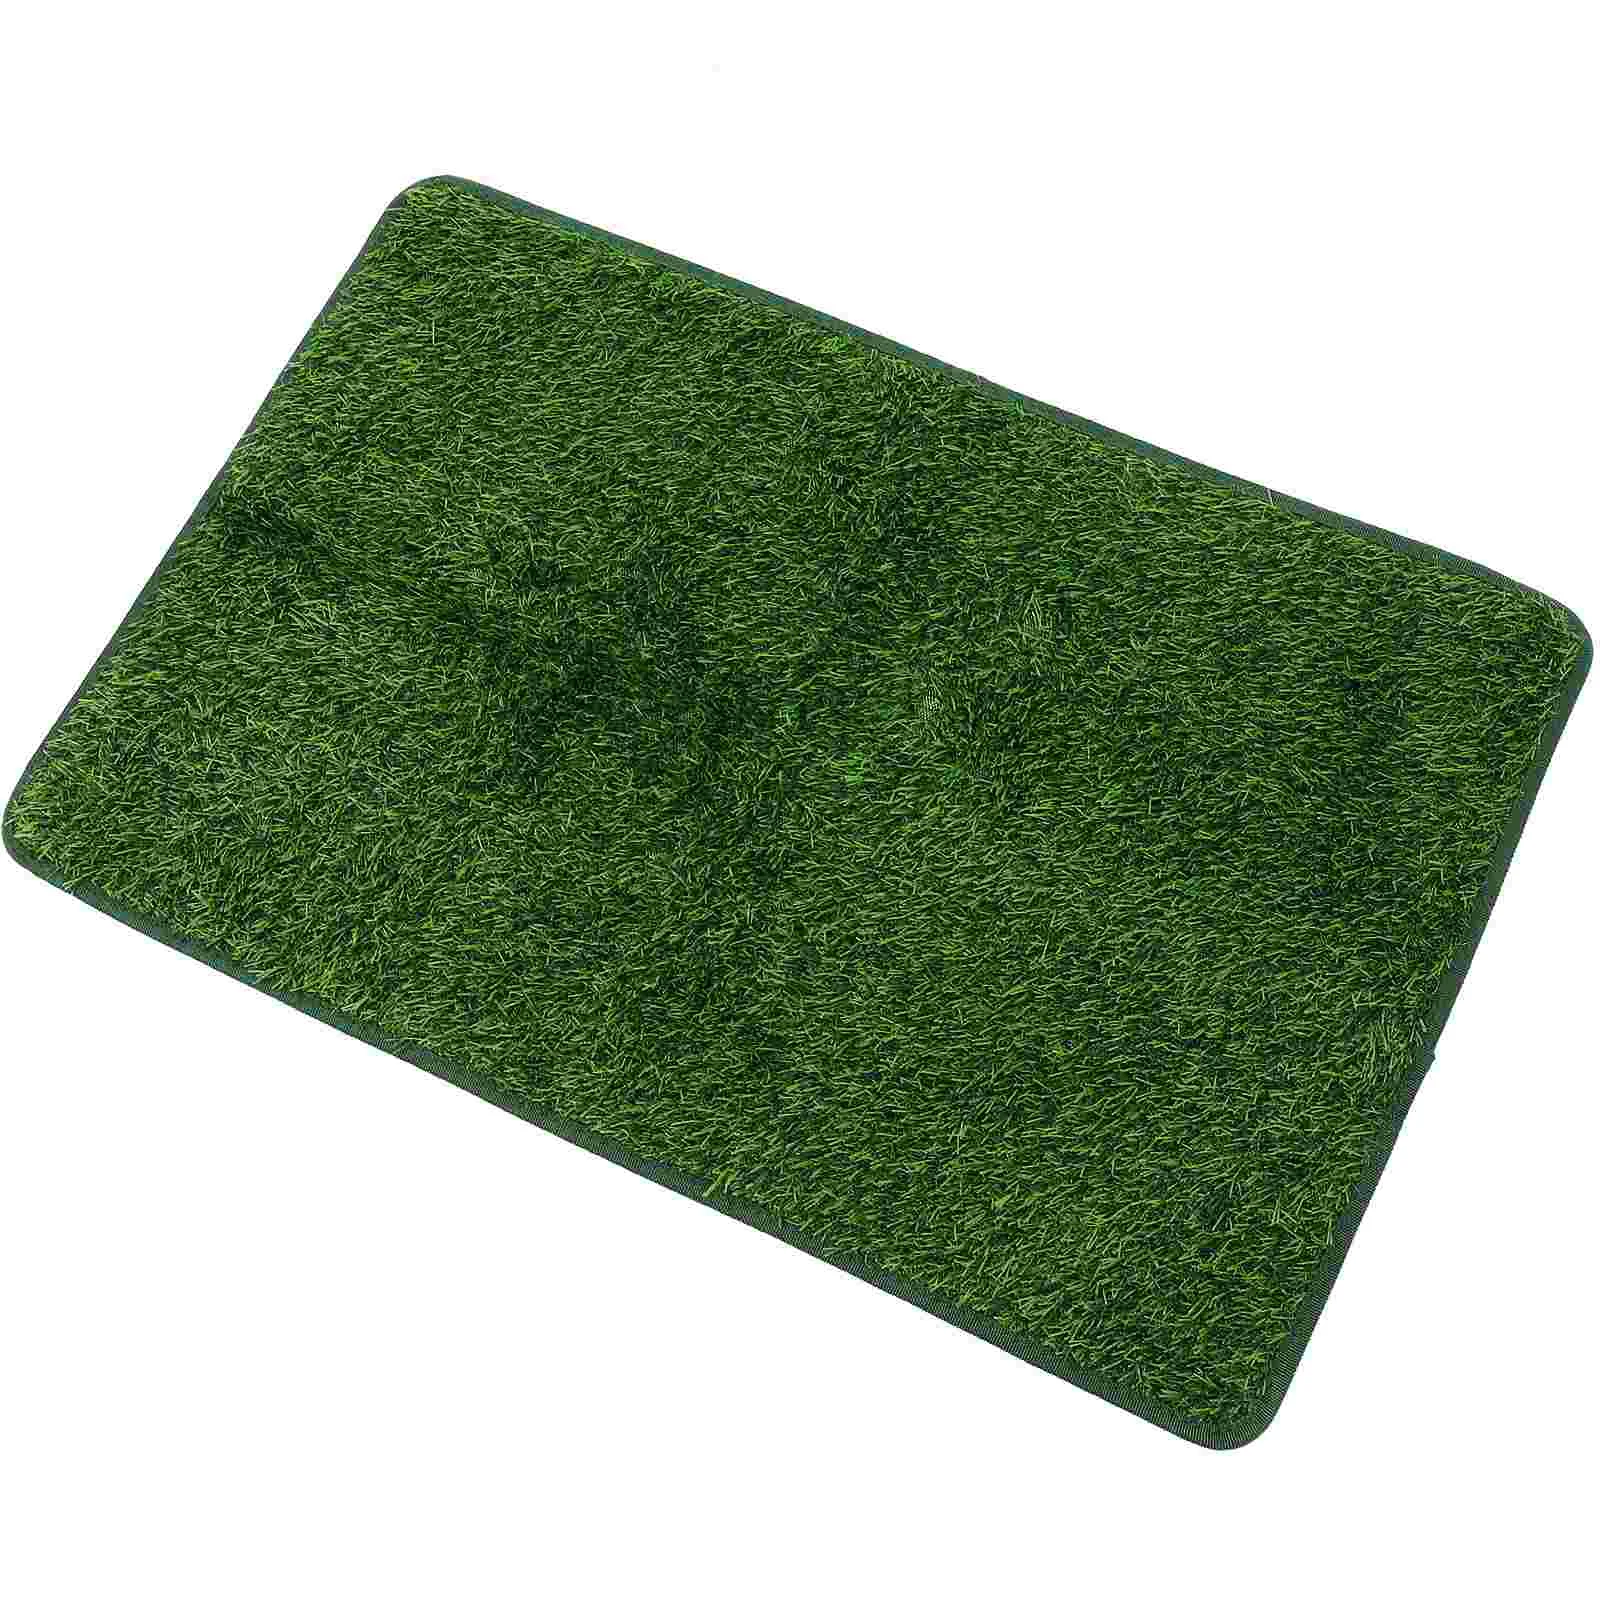 

Popetpop Turf Grass Dog Pad Washable Pet Pee Pads Artificial Patch Potty Training Mat Reusable Incontinence Bed Absorbing Pets